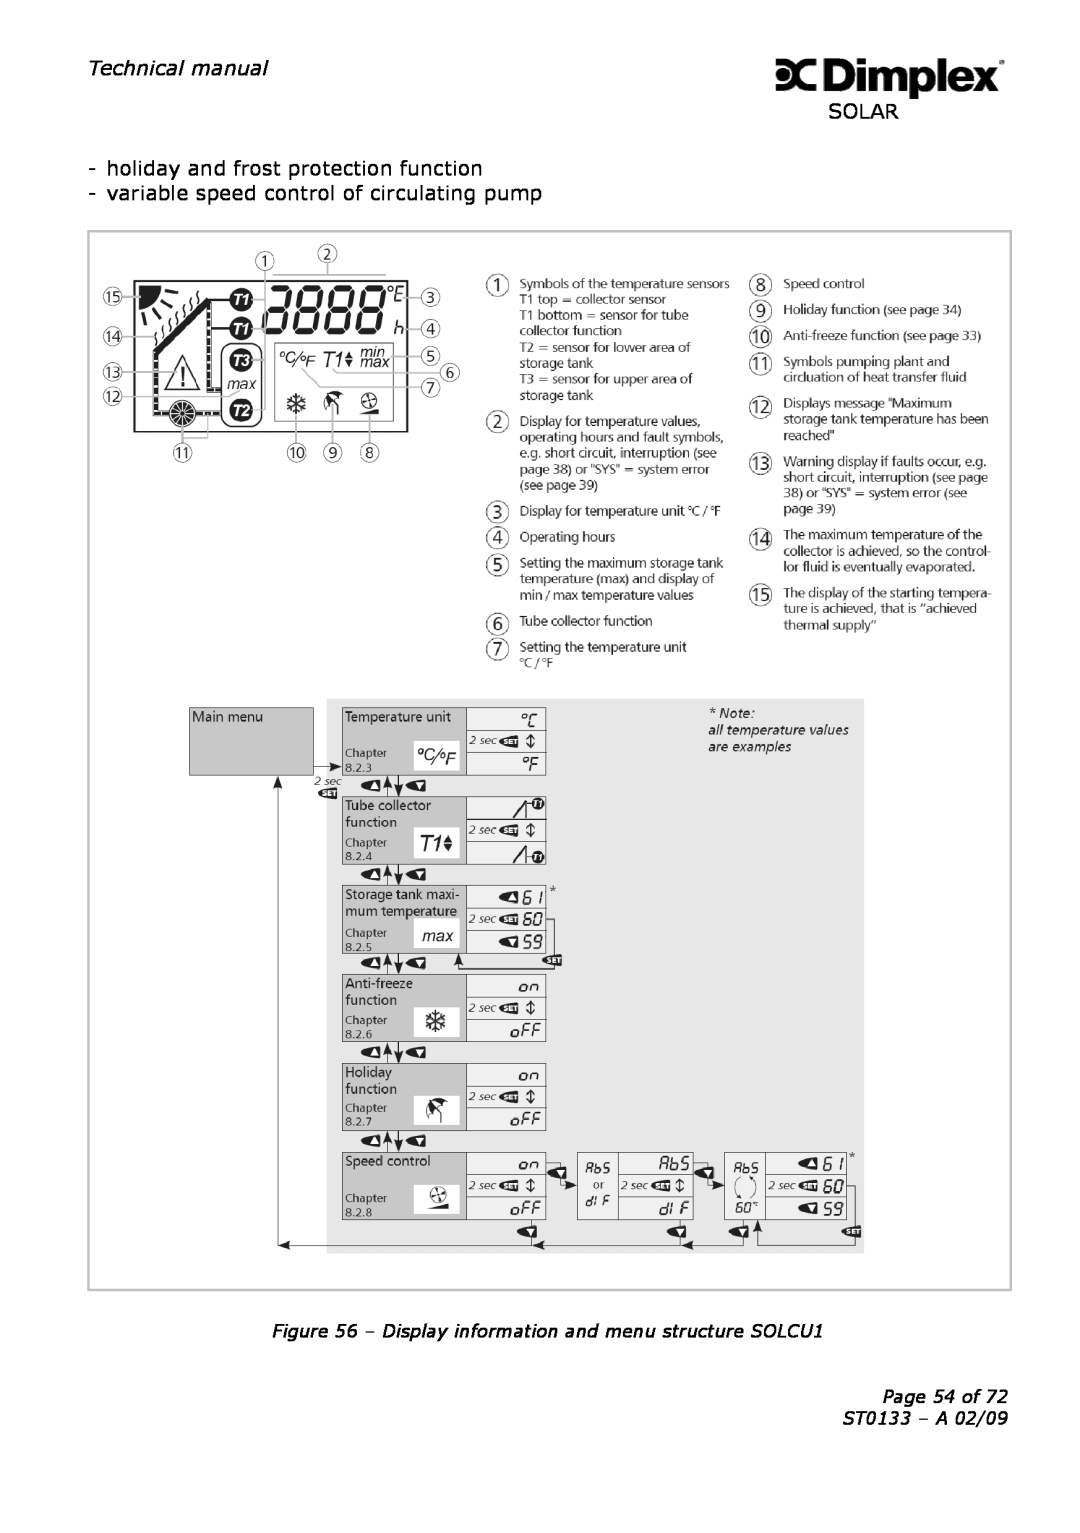 Dimplex ST0133 Technical manual, SOLAR holiday and frost protection function, variable speed control of circulating pump 